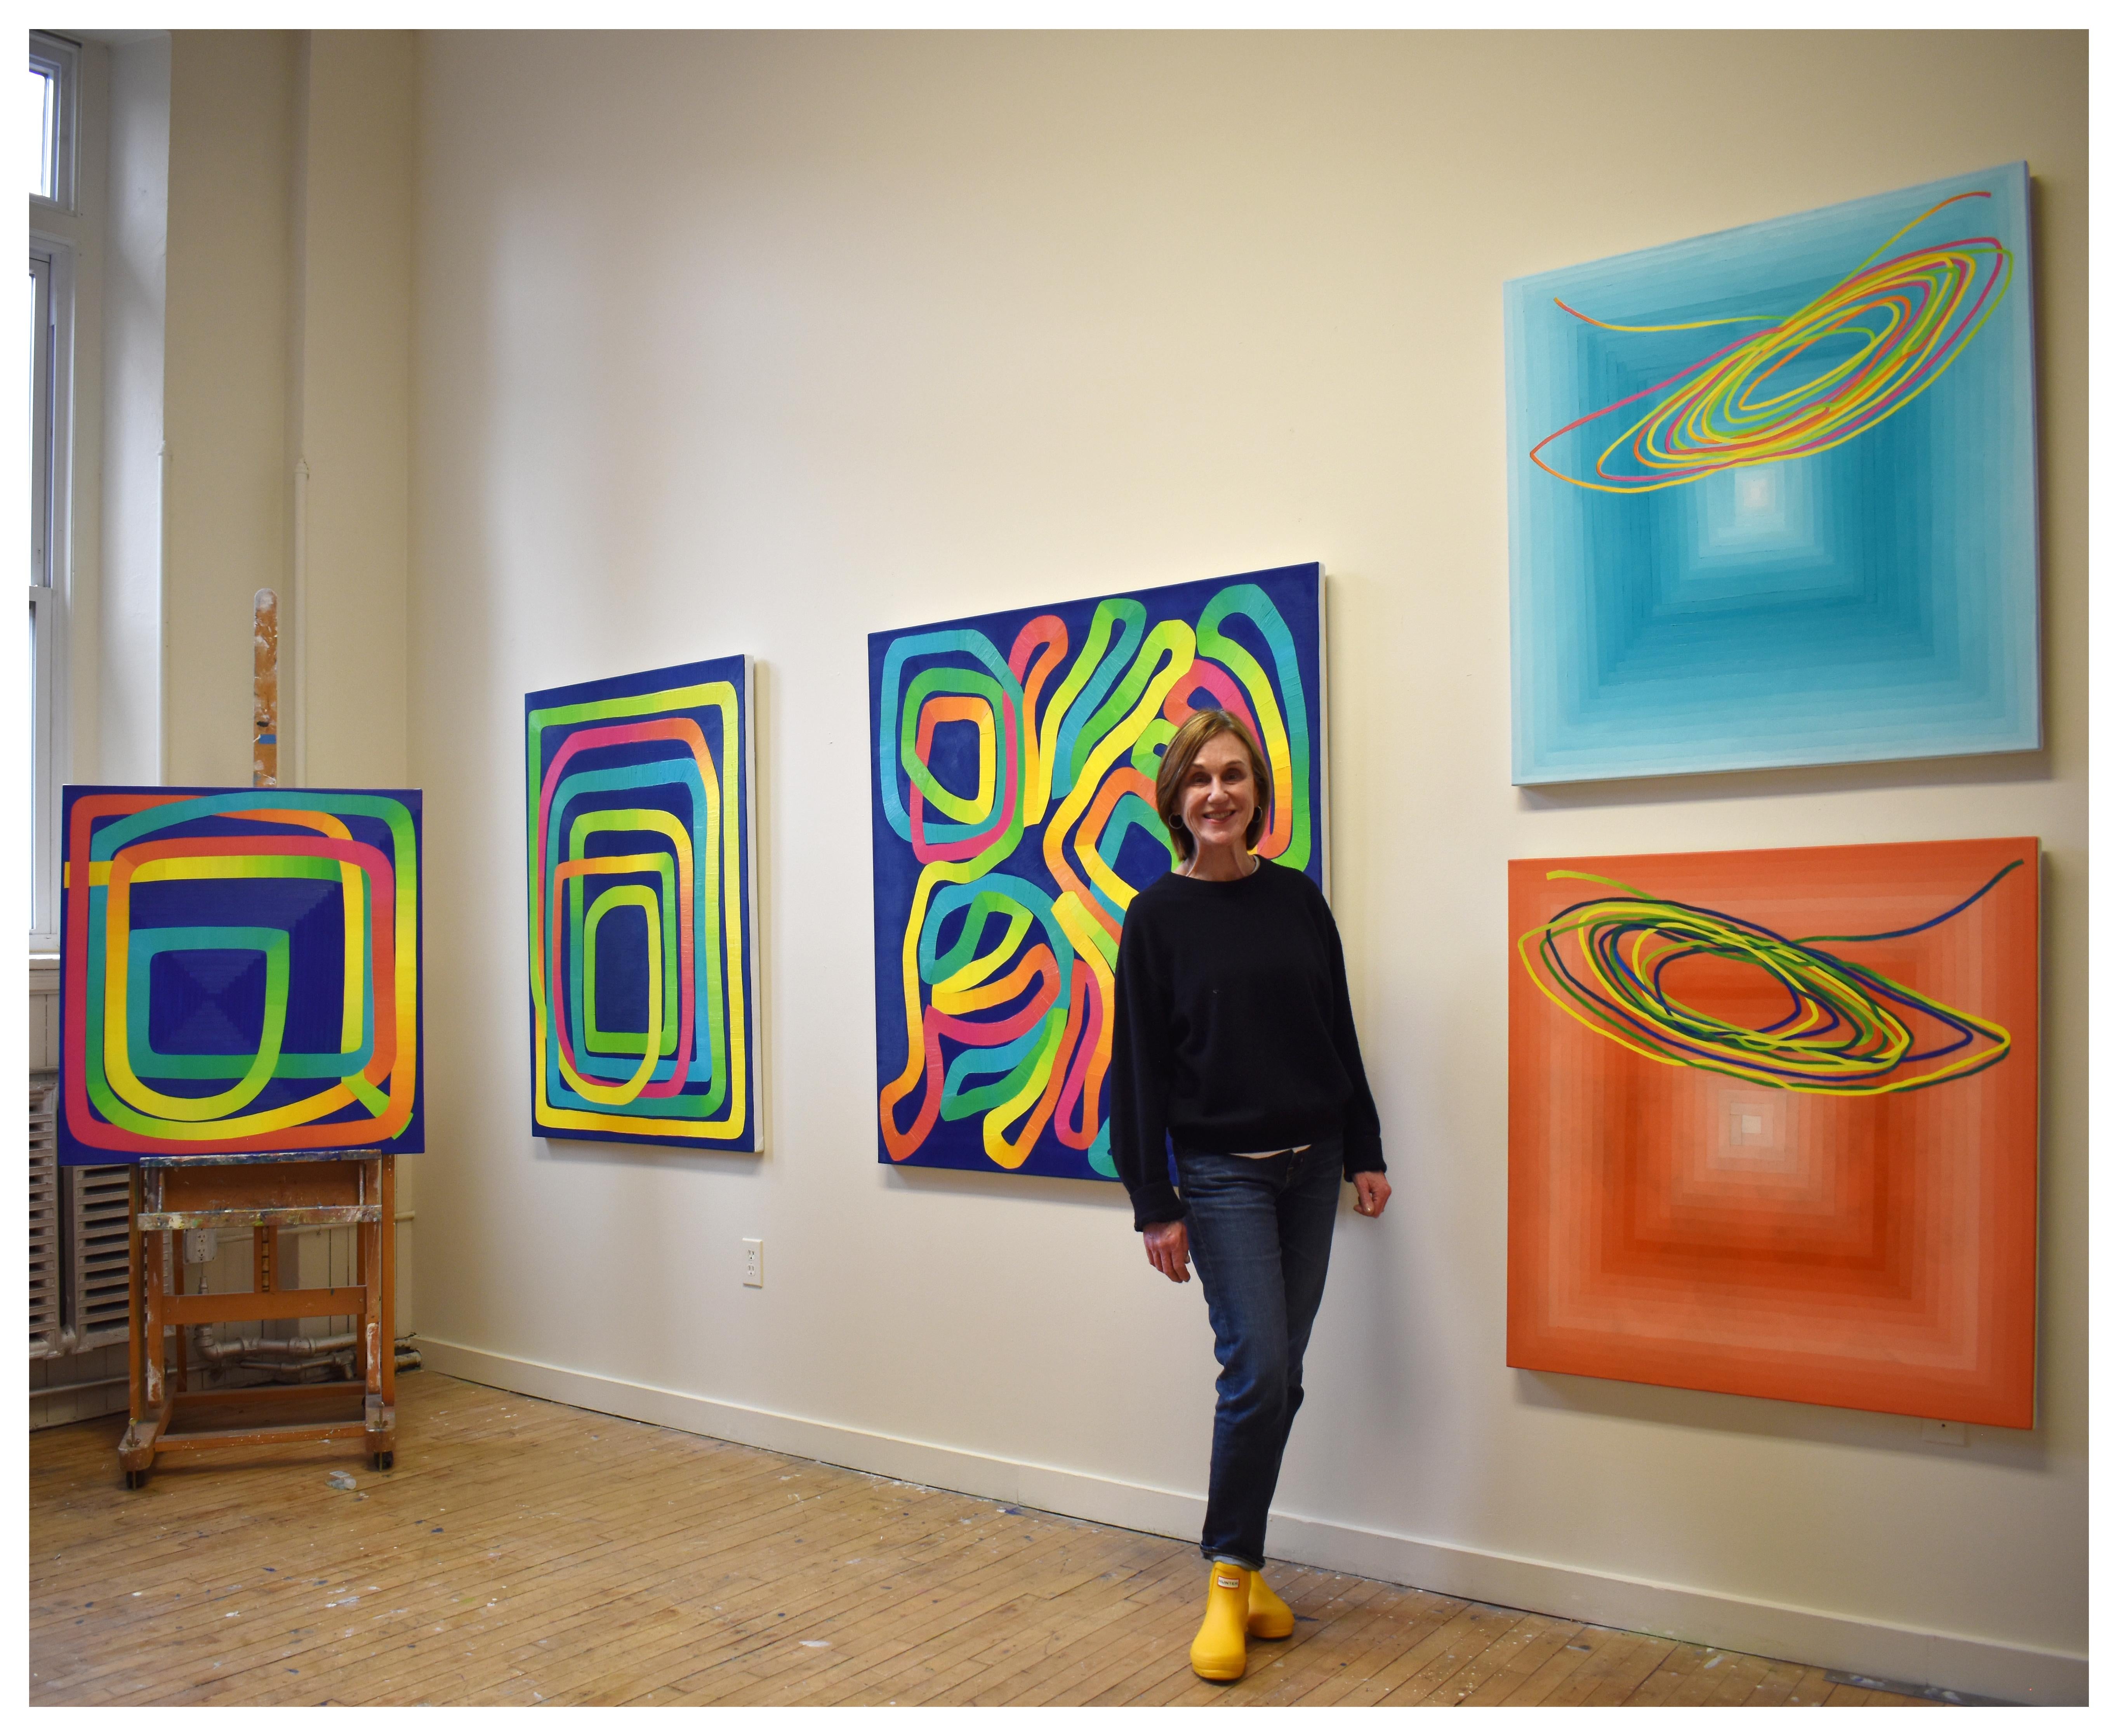 Paula Cahill's linear abstract compositions are often comprised of a single, luminous line that meanders, changes color, and seamlessly connects back to itself. 